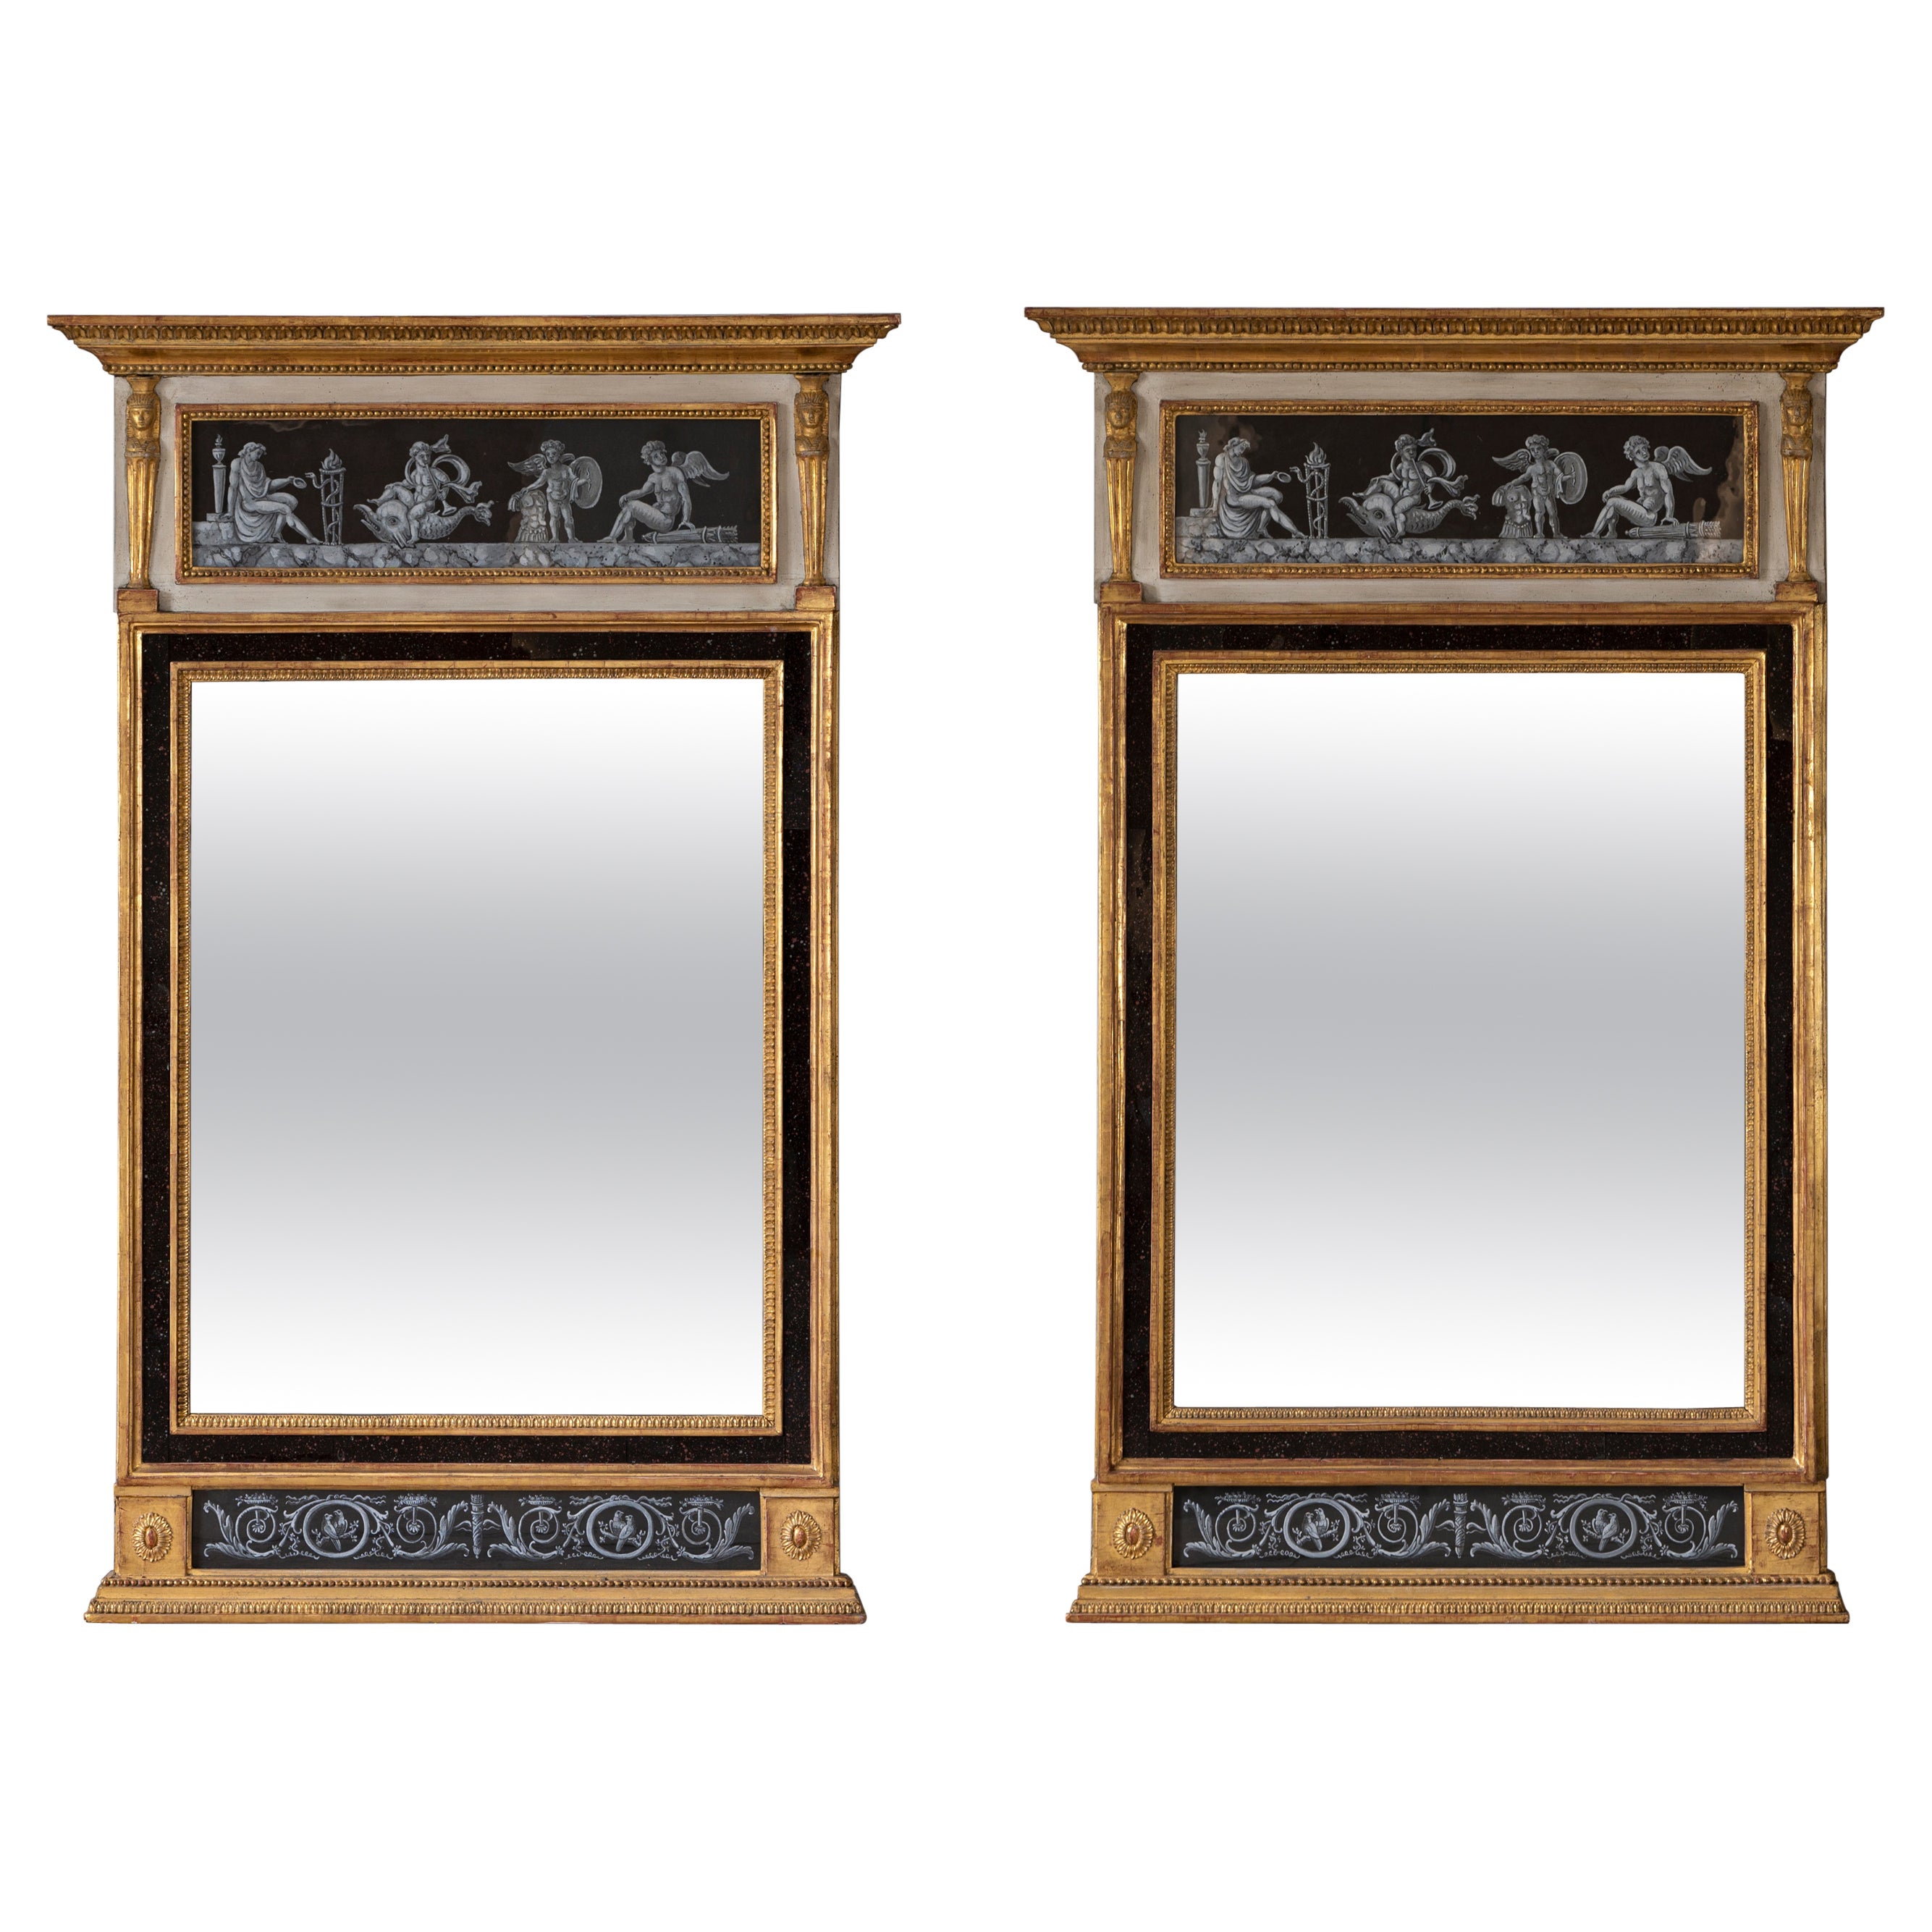 Exceptional Pair of 18th Century Swedish Gustavian Gilt Wood Mirrors For Sale